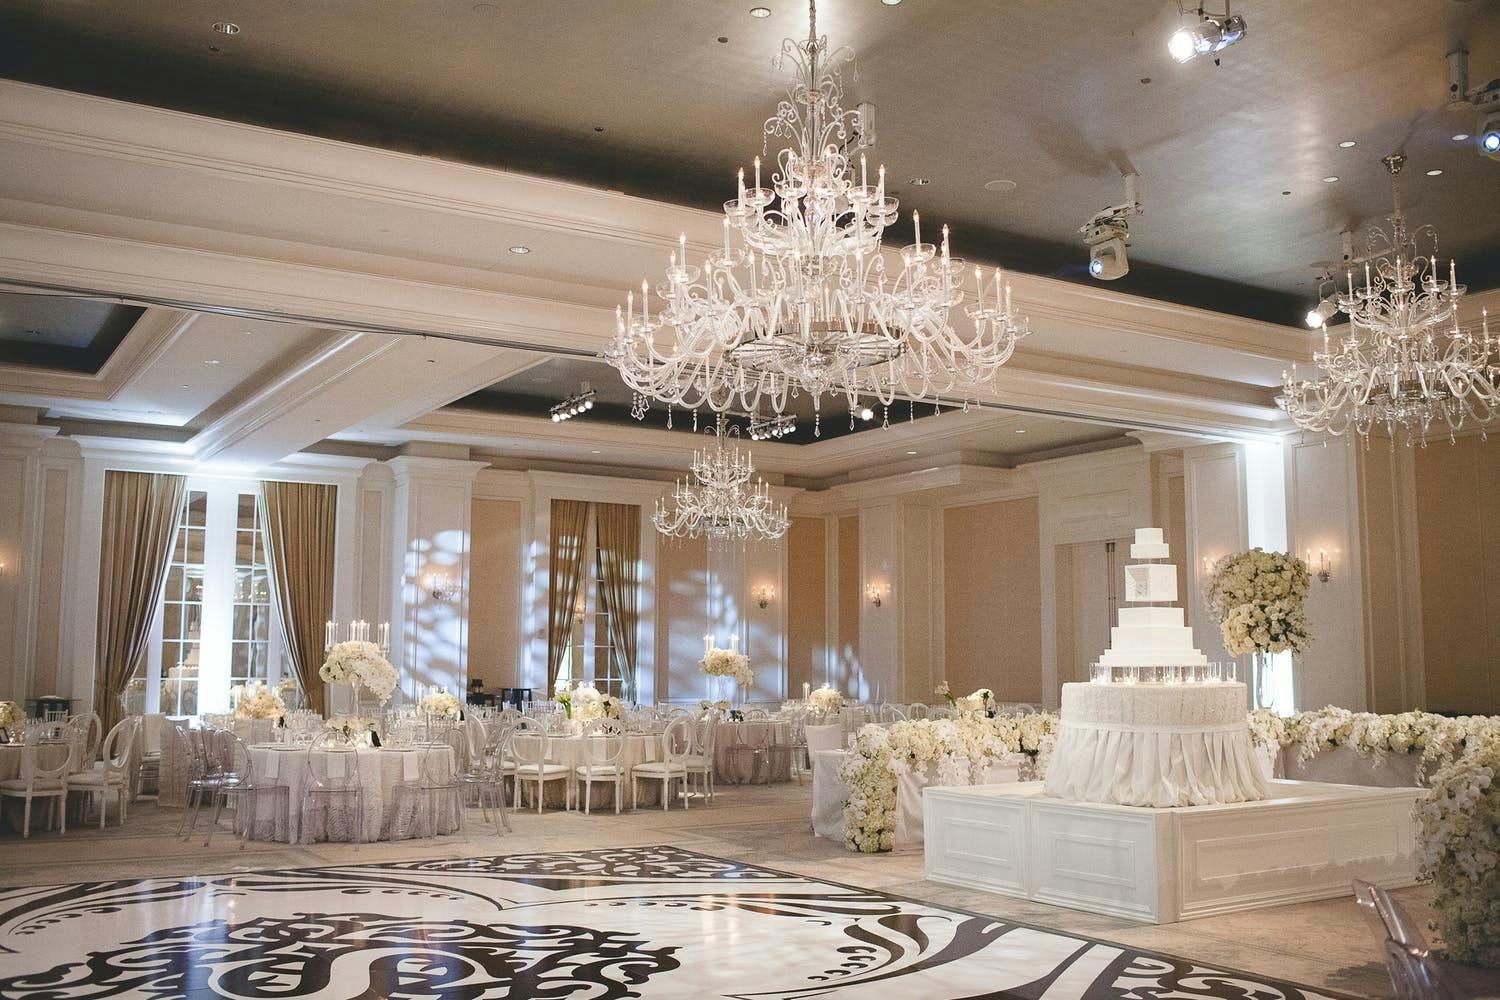 Ballroom Wedding With Glittering Chandeliers and Black and White Decal Dance Floor | PartySlate